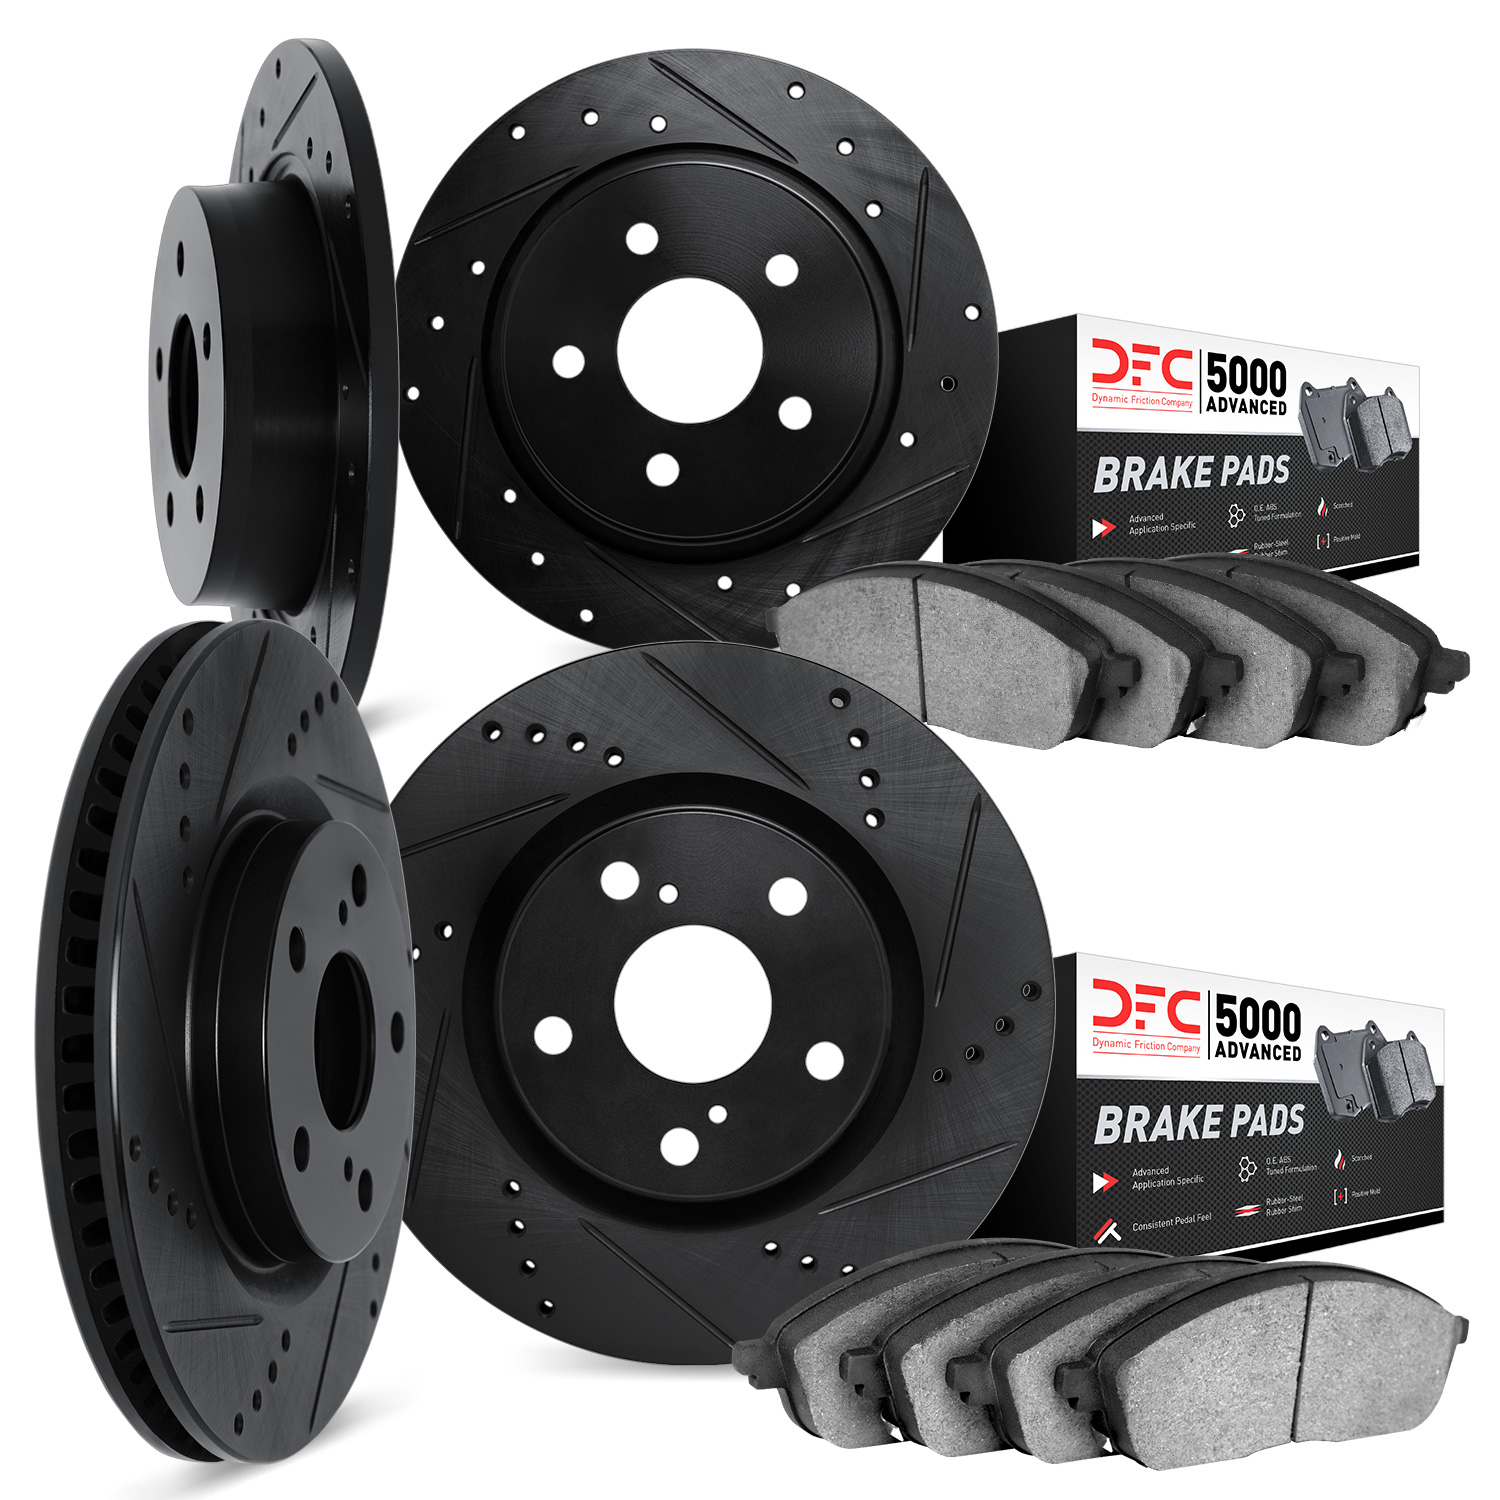 8504-27006 Drilled/Slotted Brake Rotors w/5000 Advanced Brake Pads Kit [Black], 2004-2013 Volvo, Position: Front and Rear